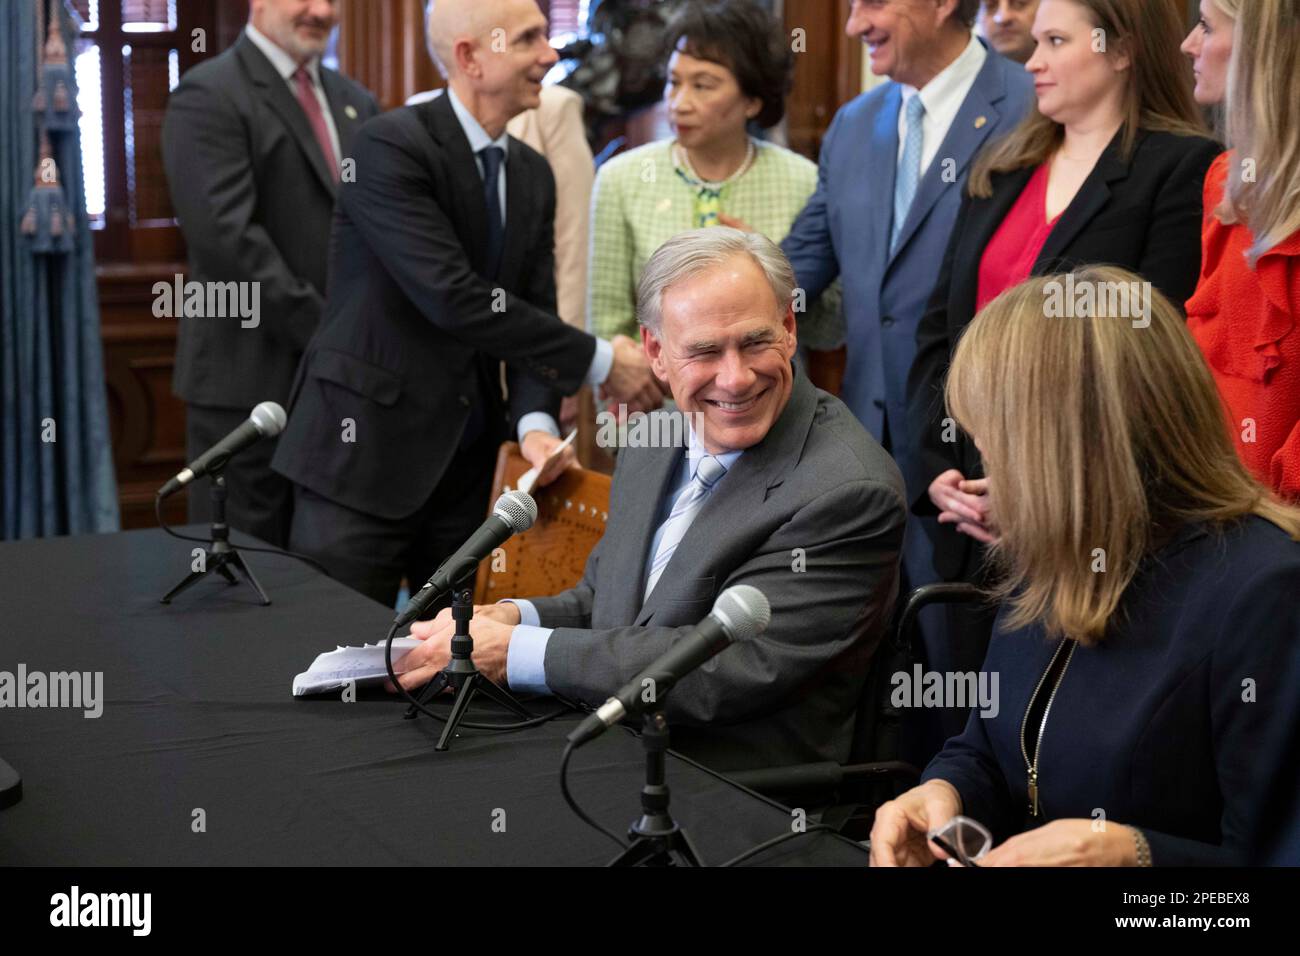 Austin Texas, USA. 15th Mar, 2023. Texas Governor GREG ABBOTT, along with Texas elected officials, educators and business representatives, holds a press conference supporting the Texas CHIPS Act. The Creating Helpful Incentives to Produce Semiconductors (CHIPS) Act, if passed, would focus on Texas research and development efforts in winning semiconductor chip projects. Credit: Bob Daemmrich/Alamy Live News Credit: Bob Daemmrich/Alamy Live News Stock Photo